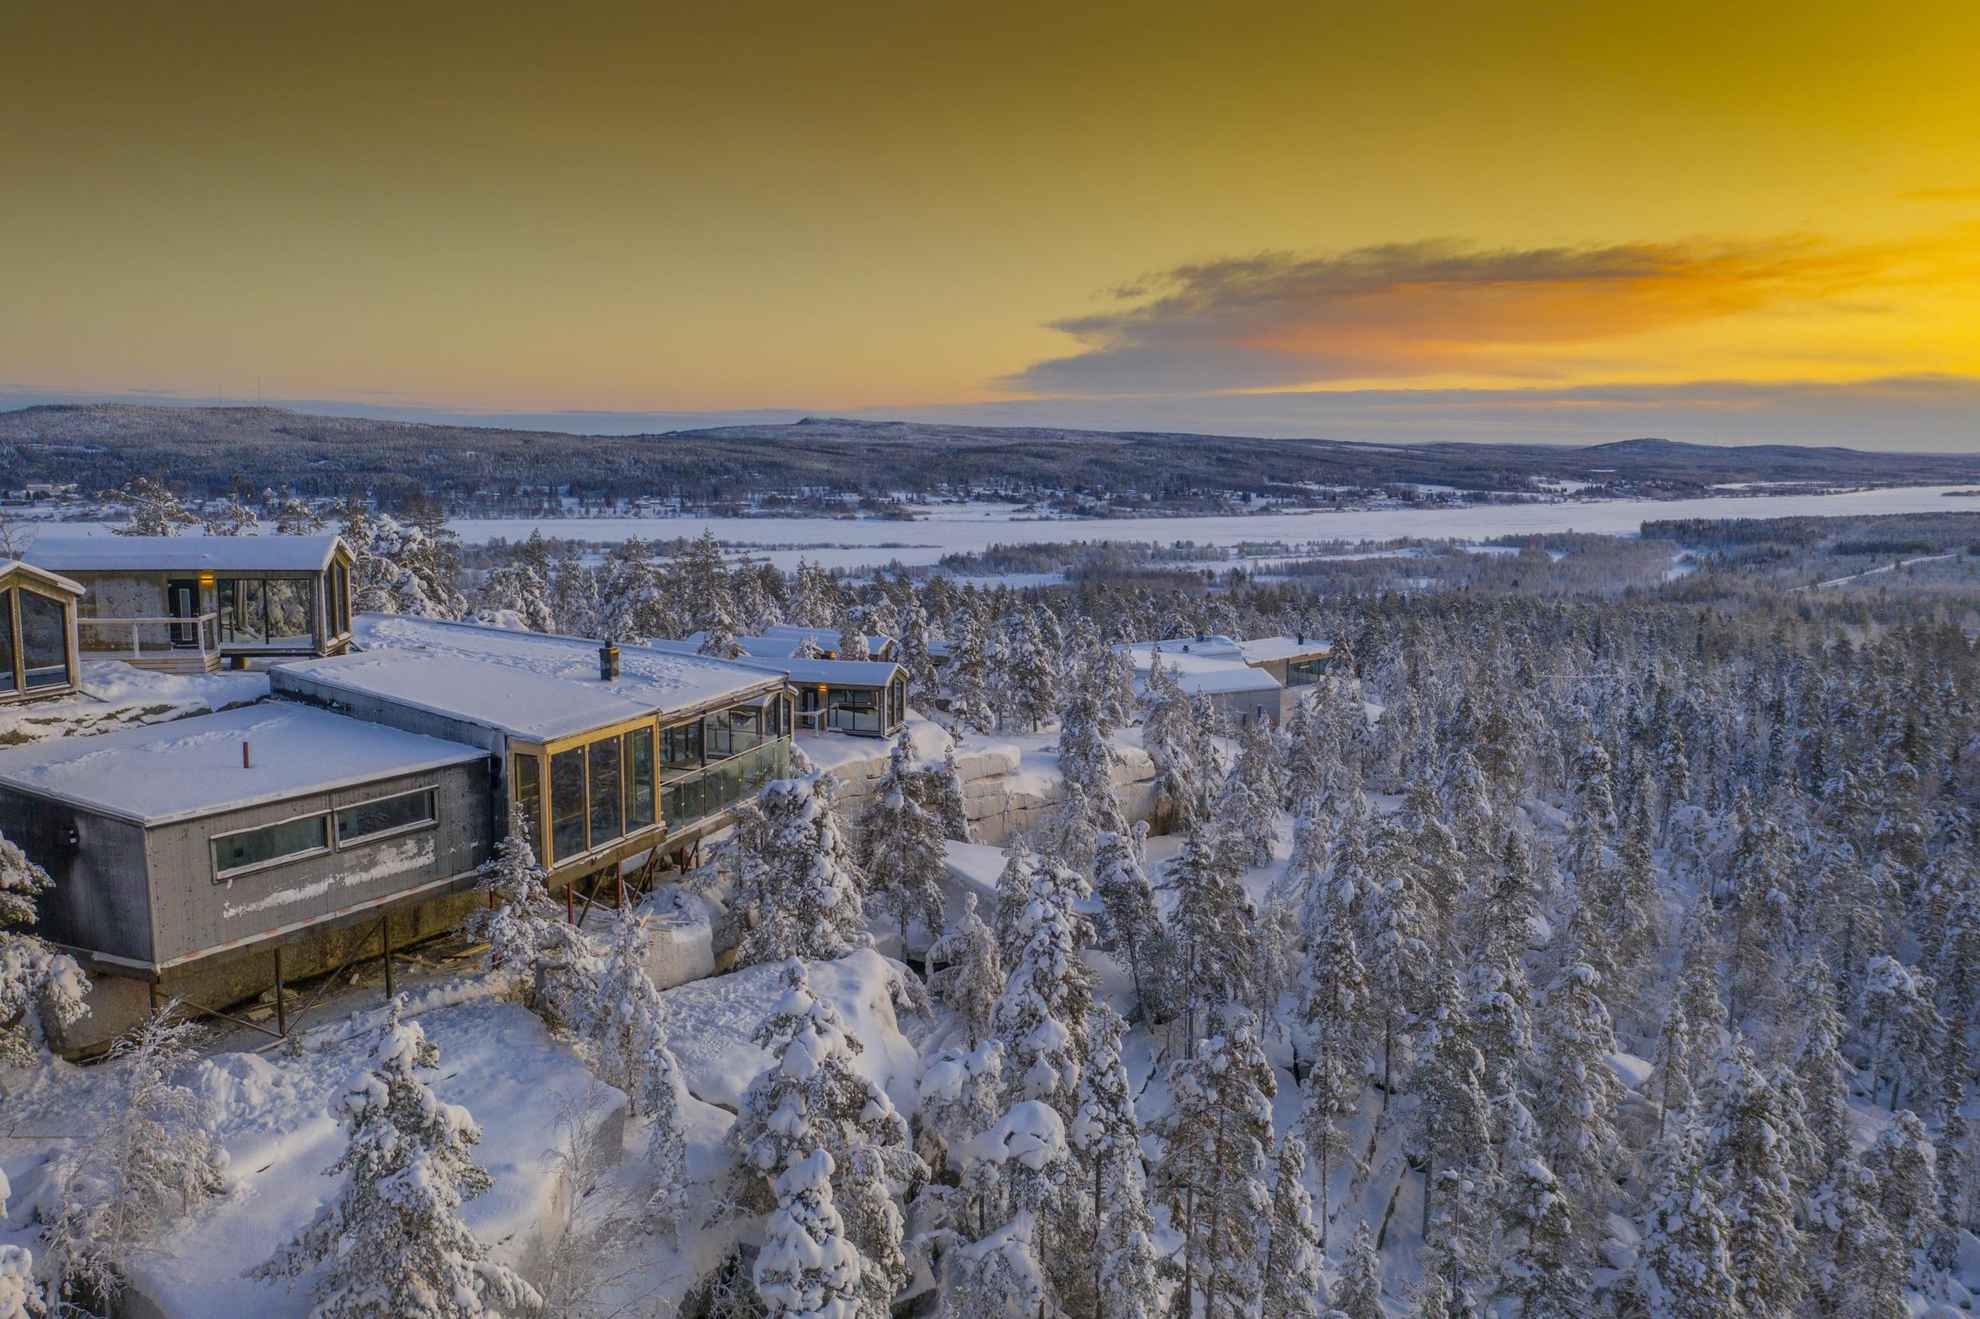 Aerial view of a snow-covered forest and the chalets at Lapland View Lodge during sunset.